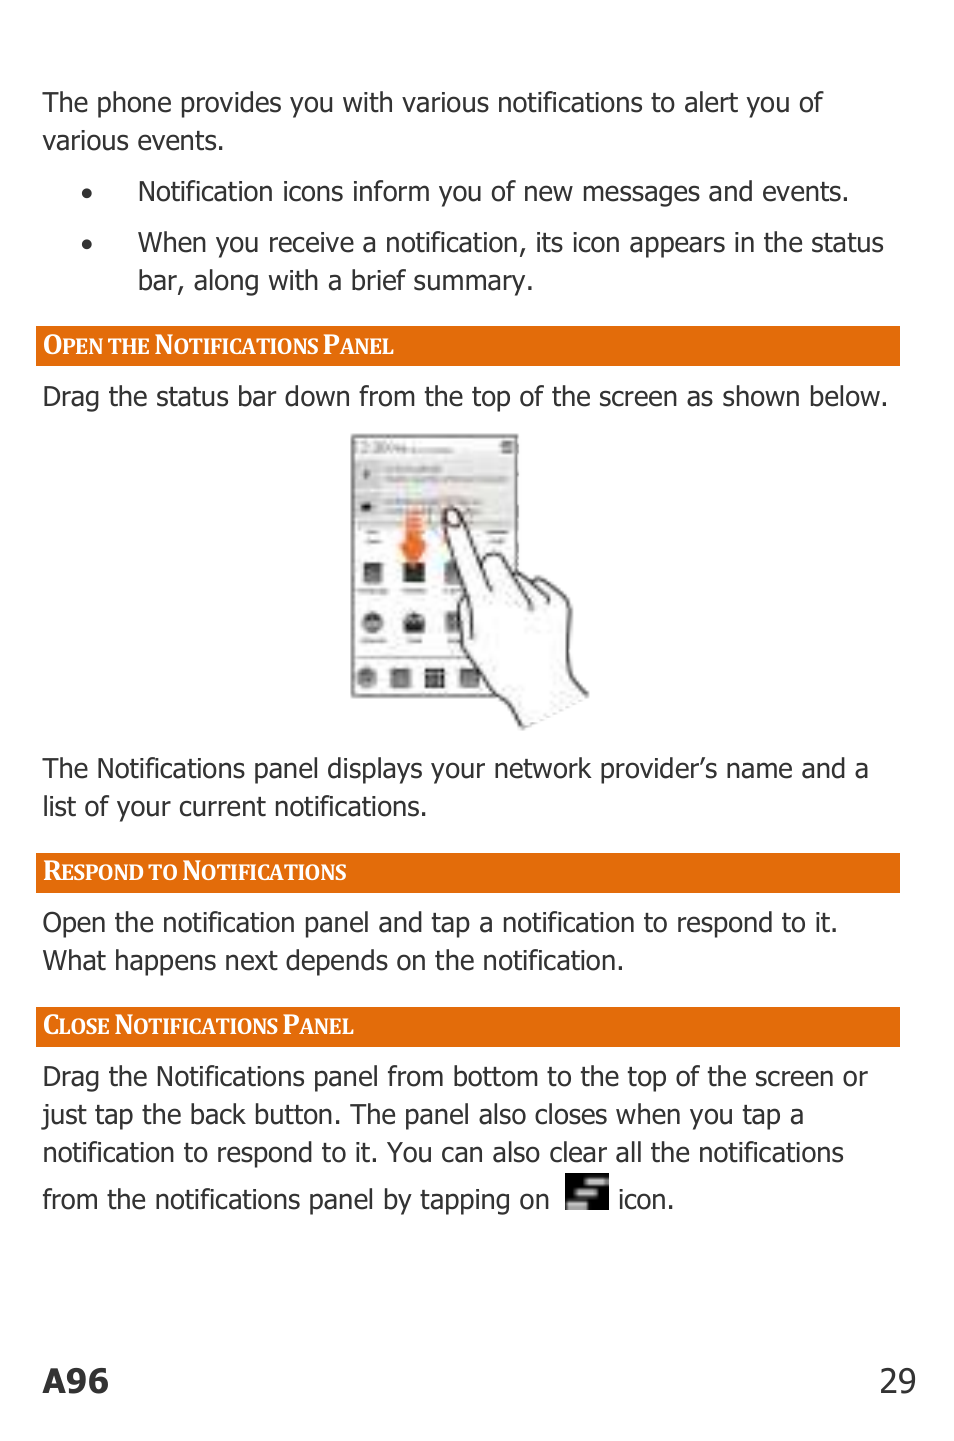 Pen the, Otifications, Anel | Espond to, Lose, A96 29 | Micromax Canvas Power User Manual | Page 29 / 56